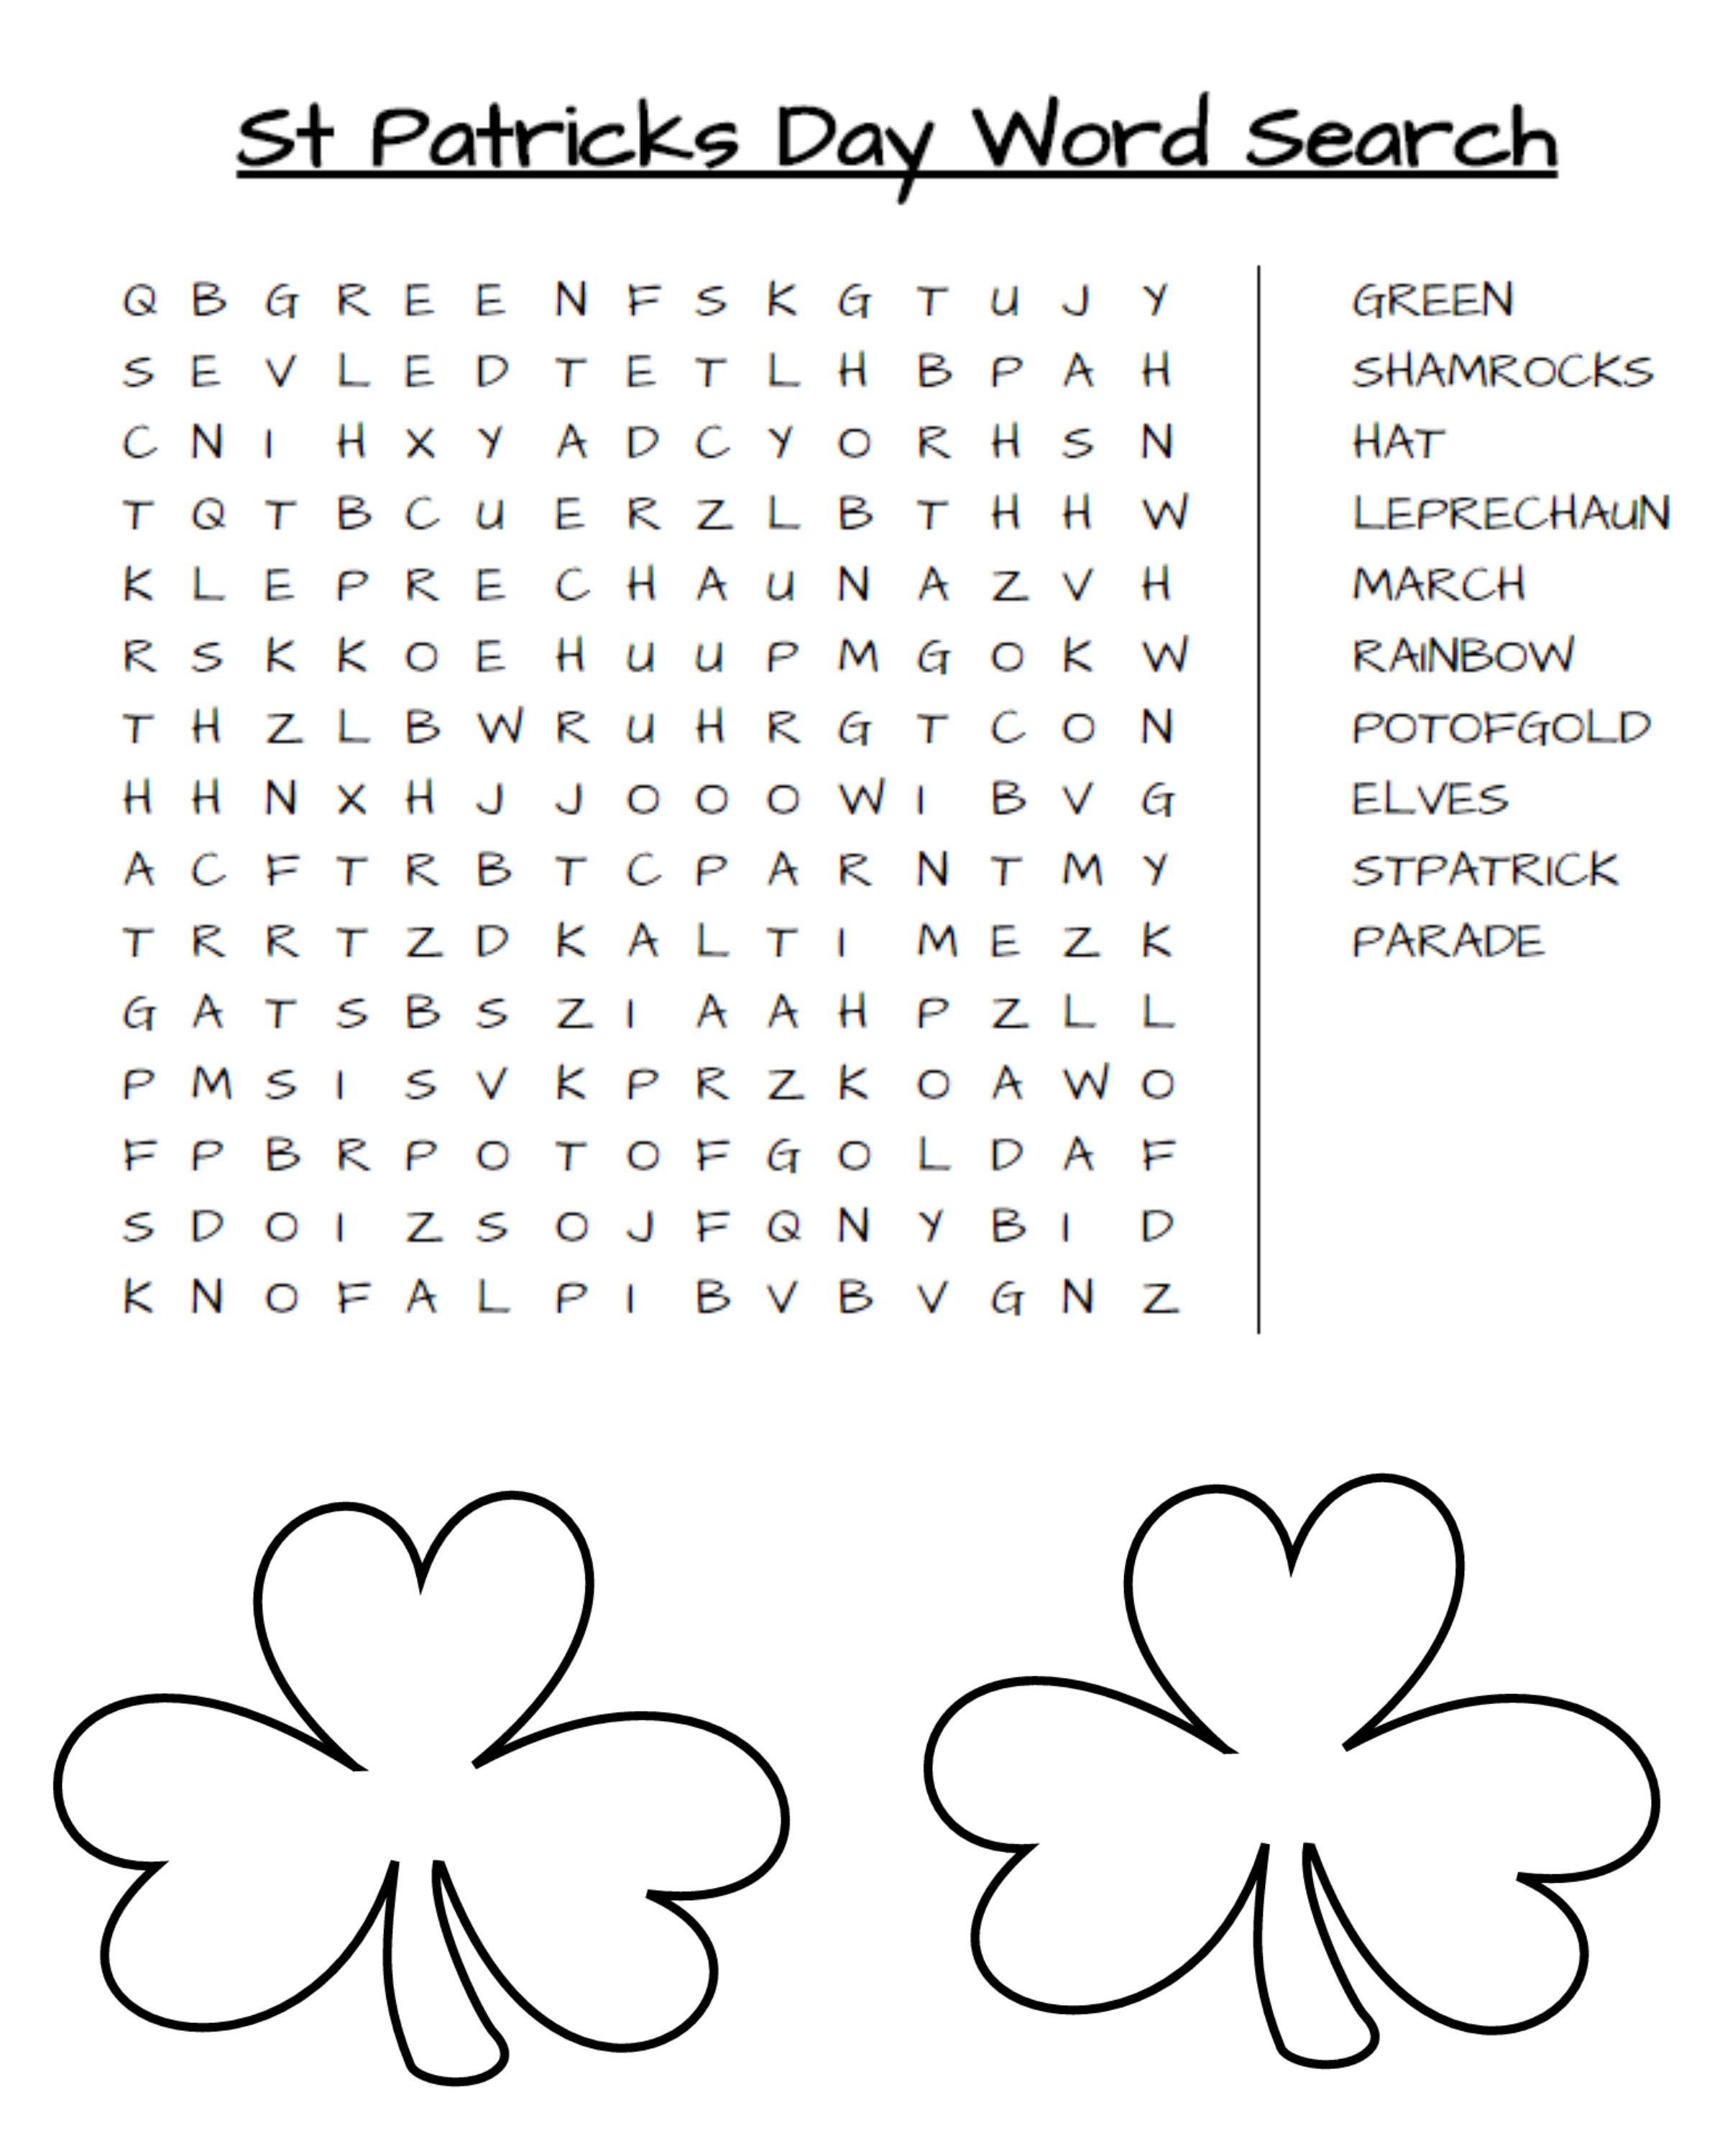 St Patrick s Day Word Search Printable Printable Word Searches